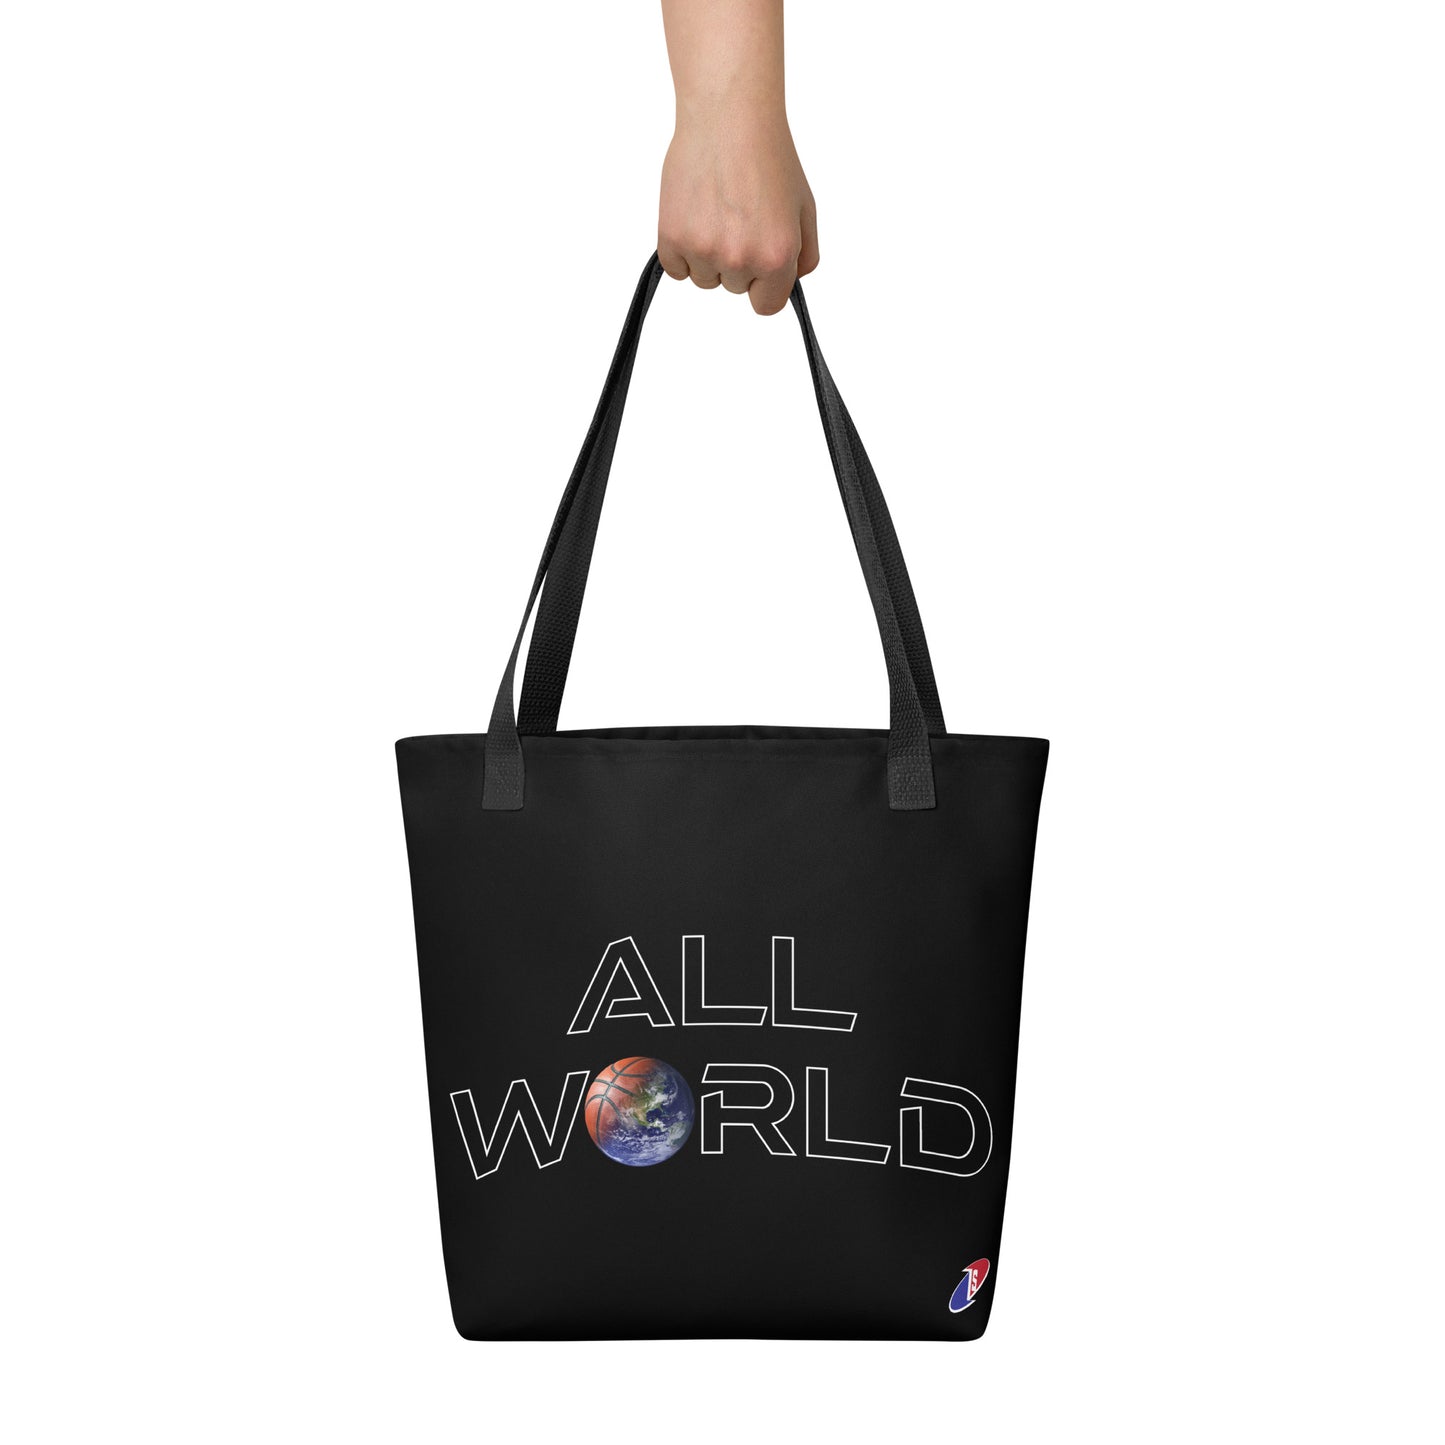 All World Tote bag